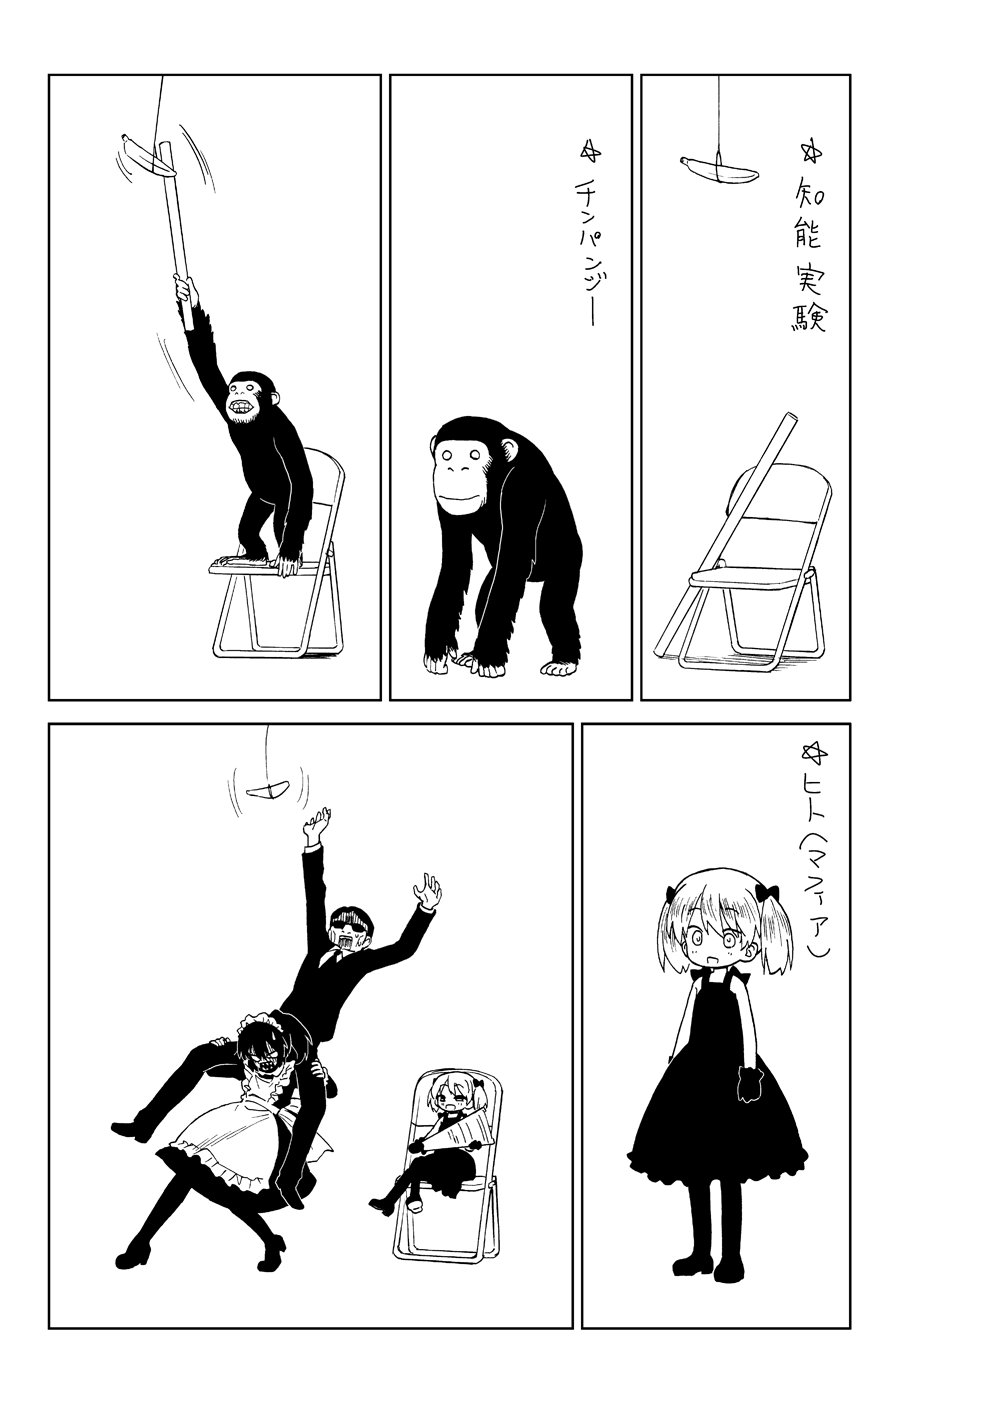 1boy 2girls banana butler carrying chair comic copyright_request folding_chair food fruit highres maid monkey monkey_and_banana_problem multiple_girls ponytail sabaku_chitai shoulder_carry stick sunglasses